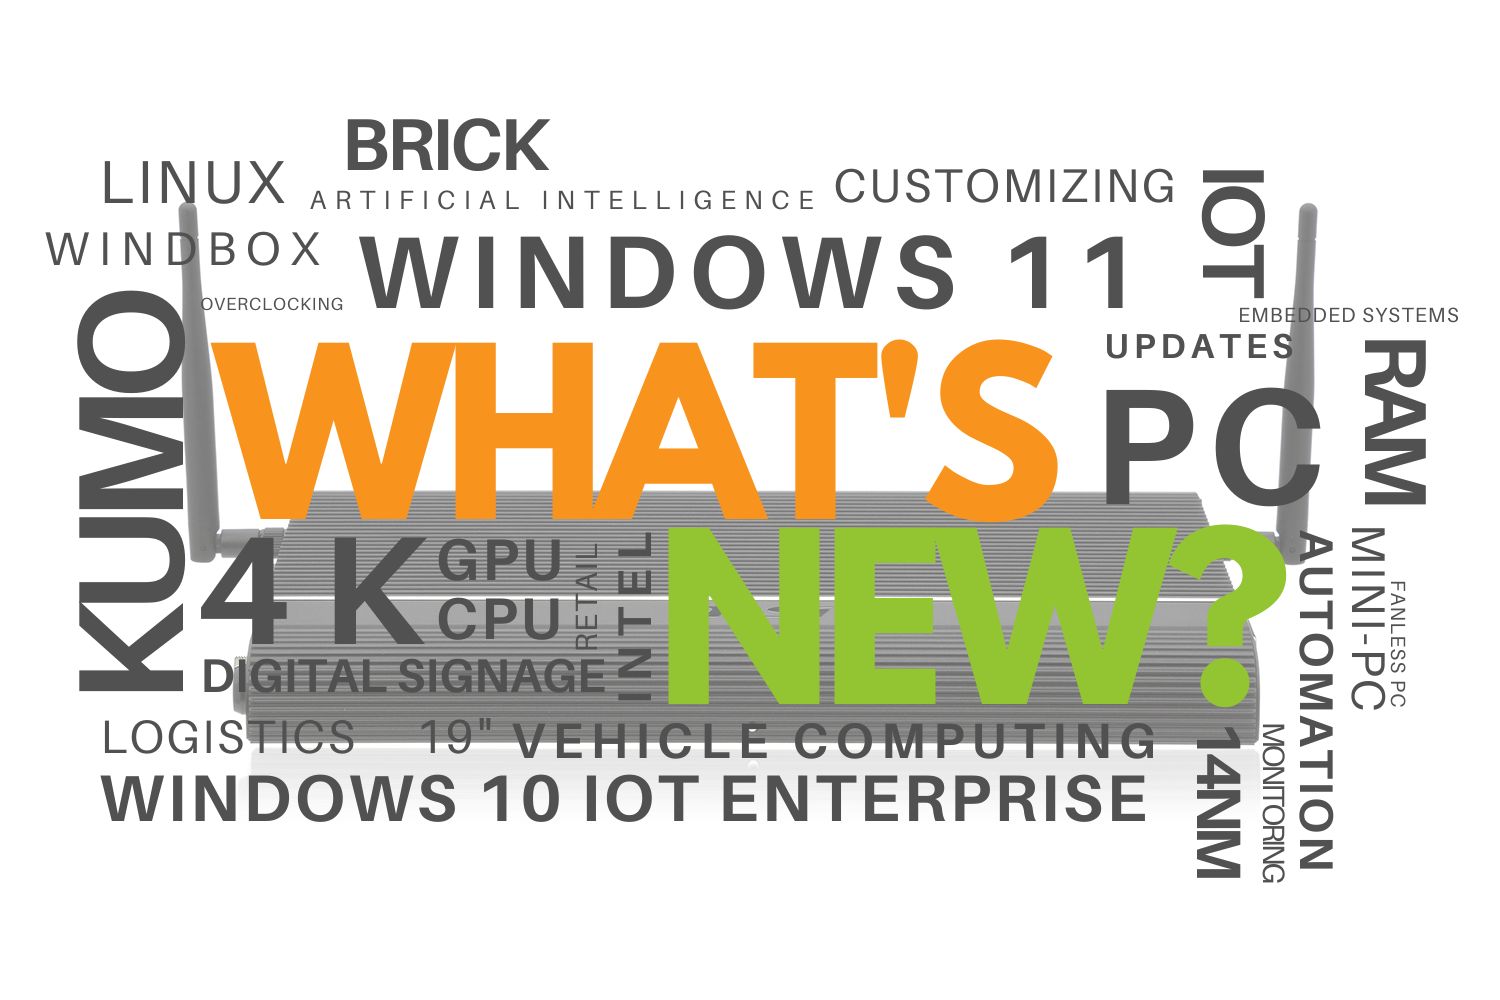 What’s New? End of life for WINDBOX and Windows 